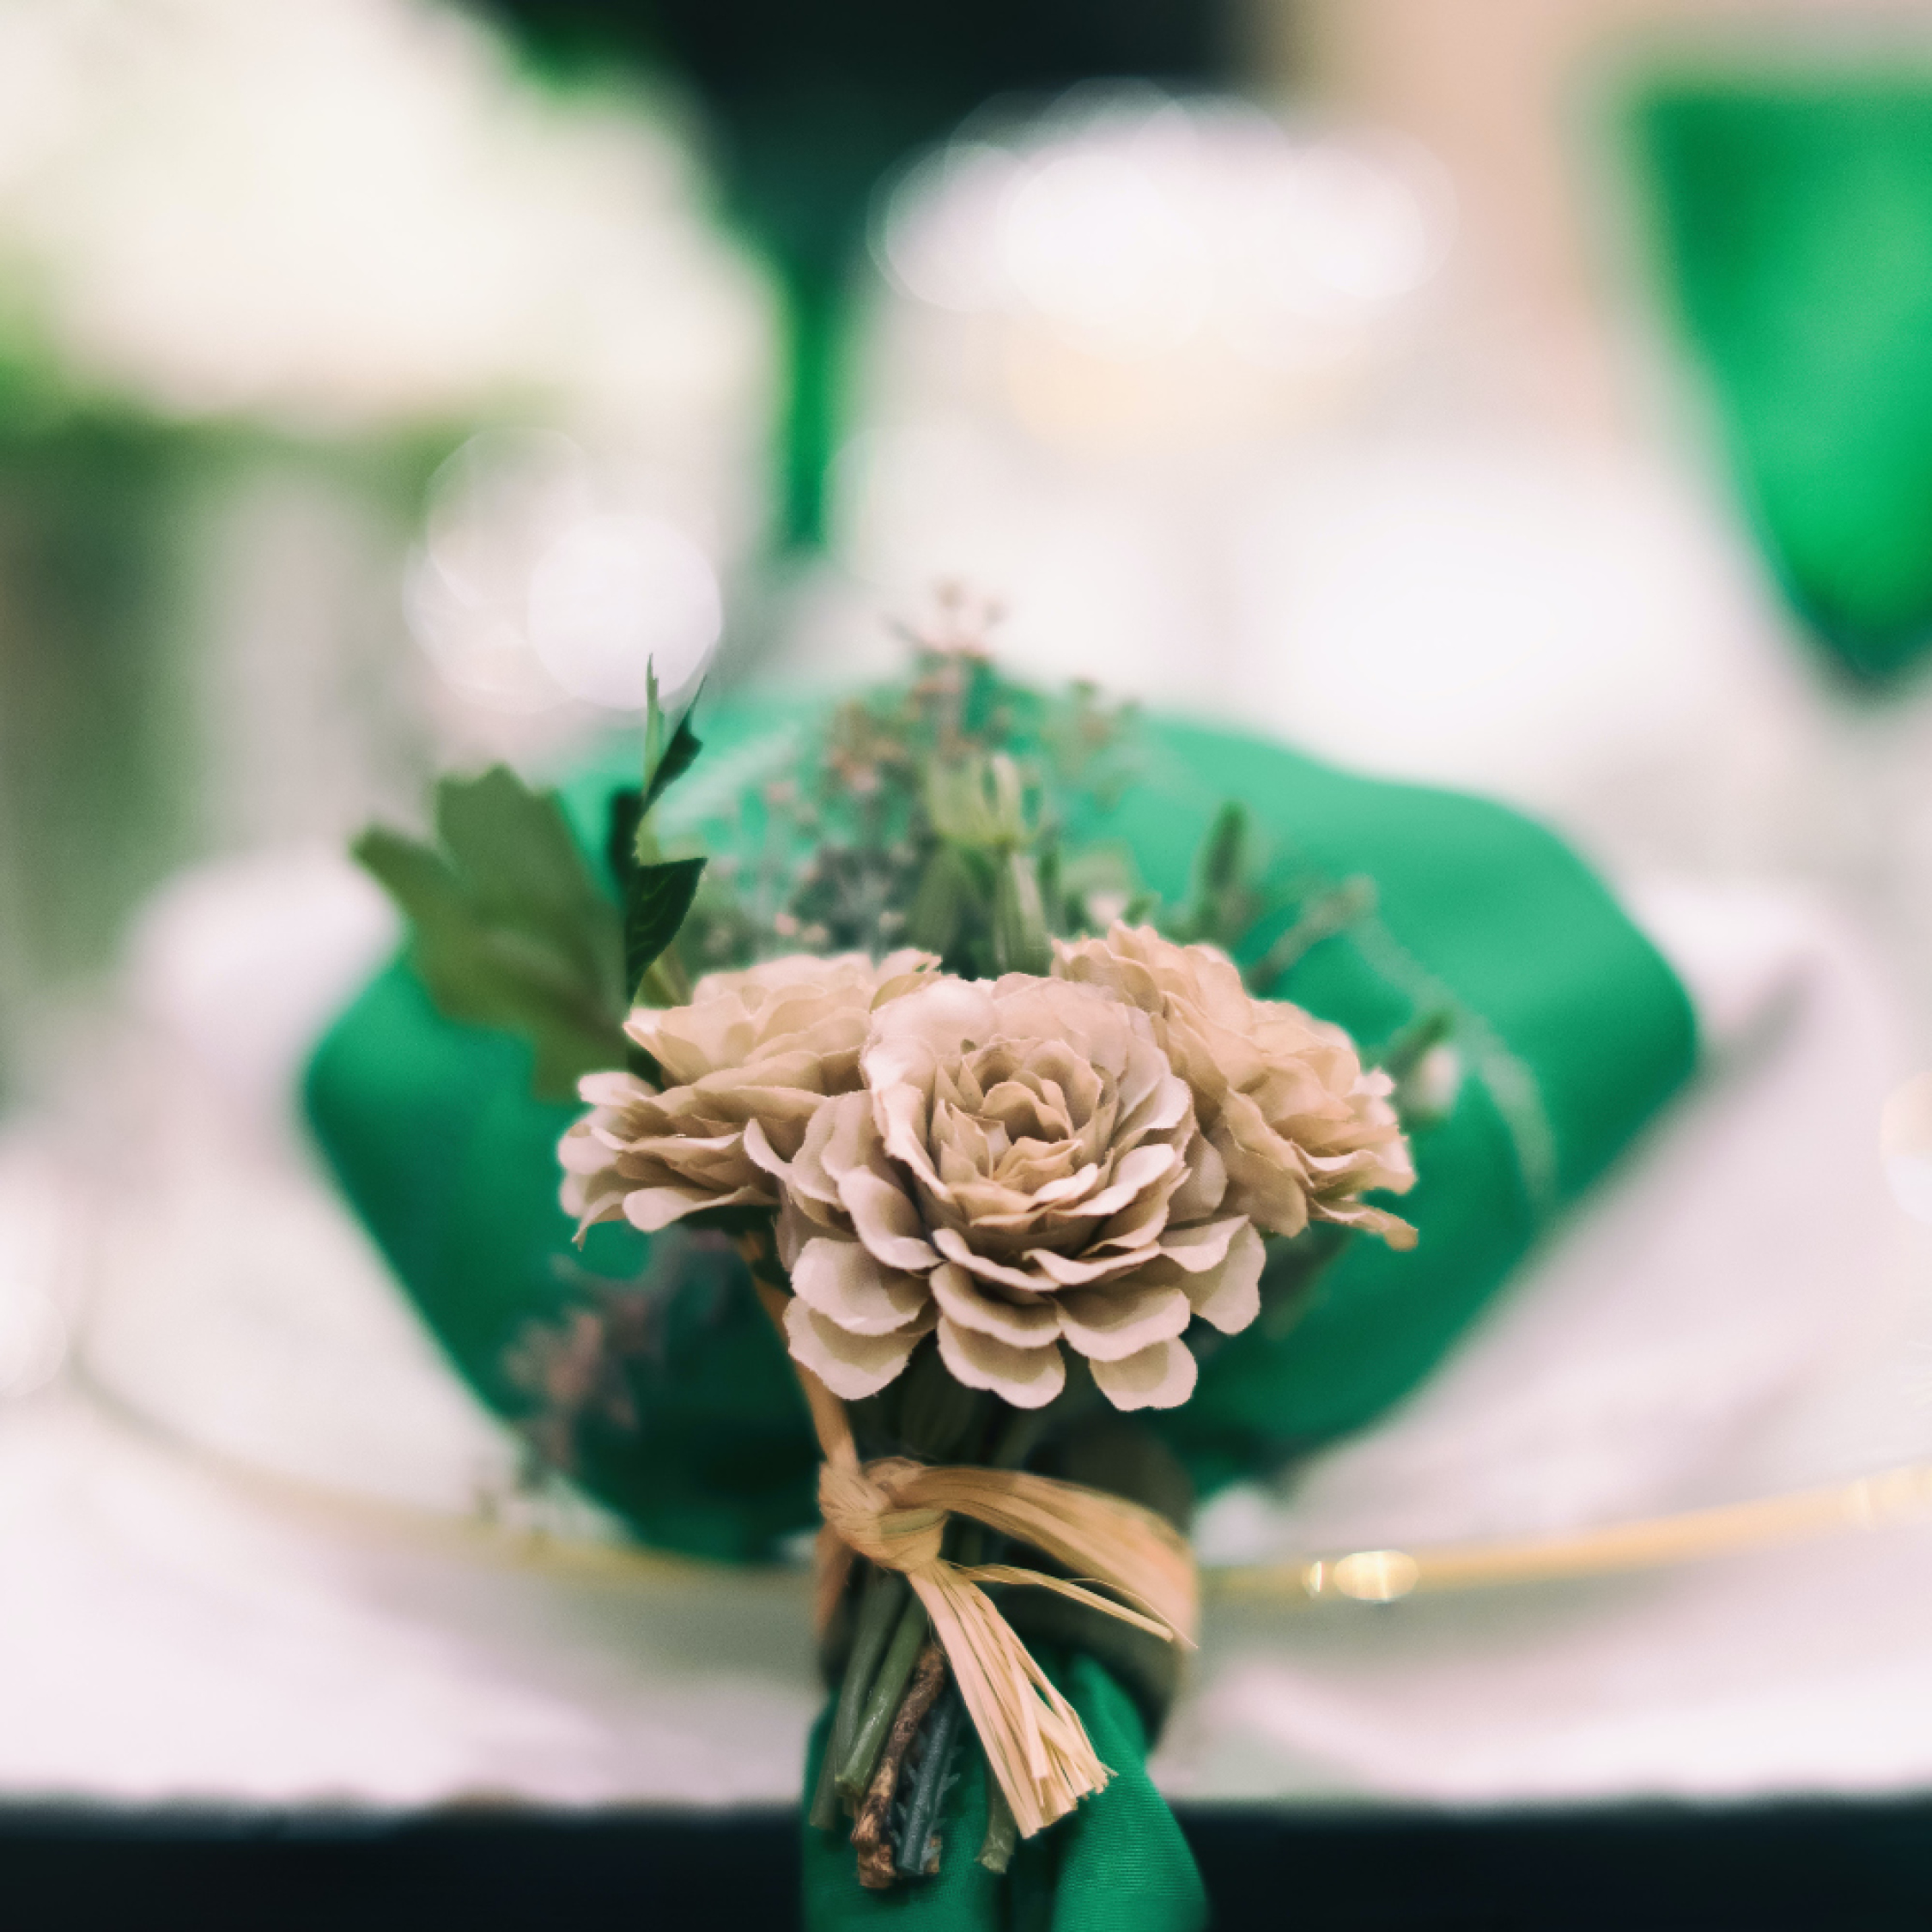 Wedding details to impress guests, flower at wedding table place